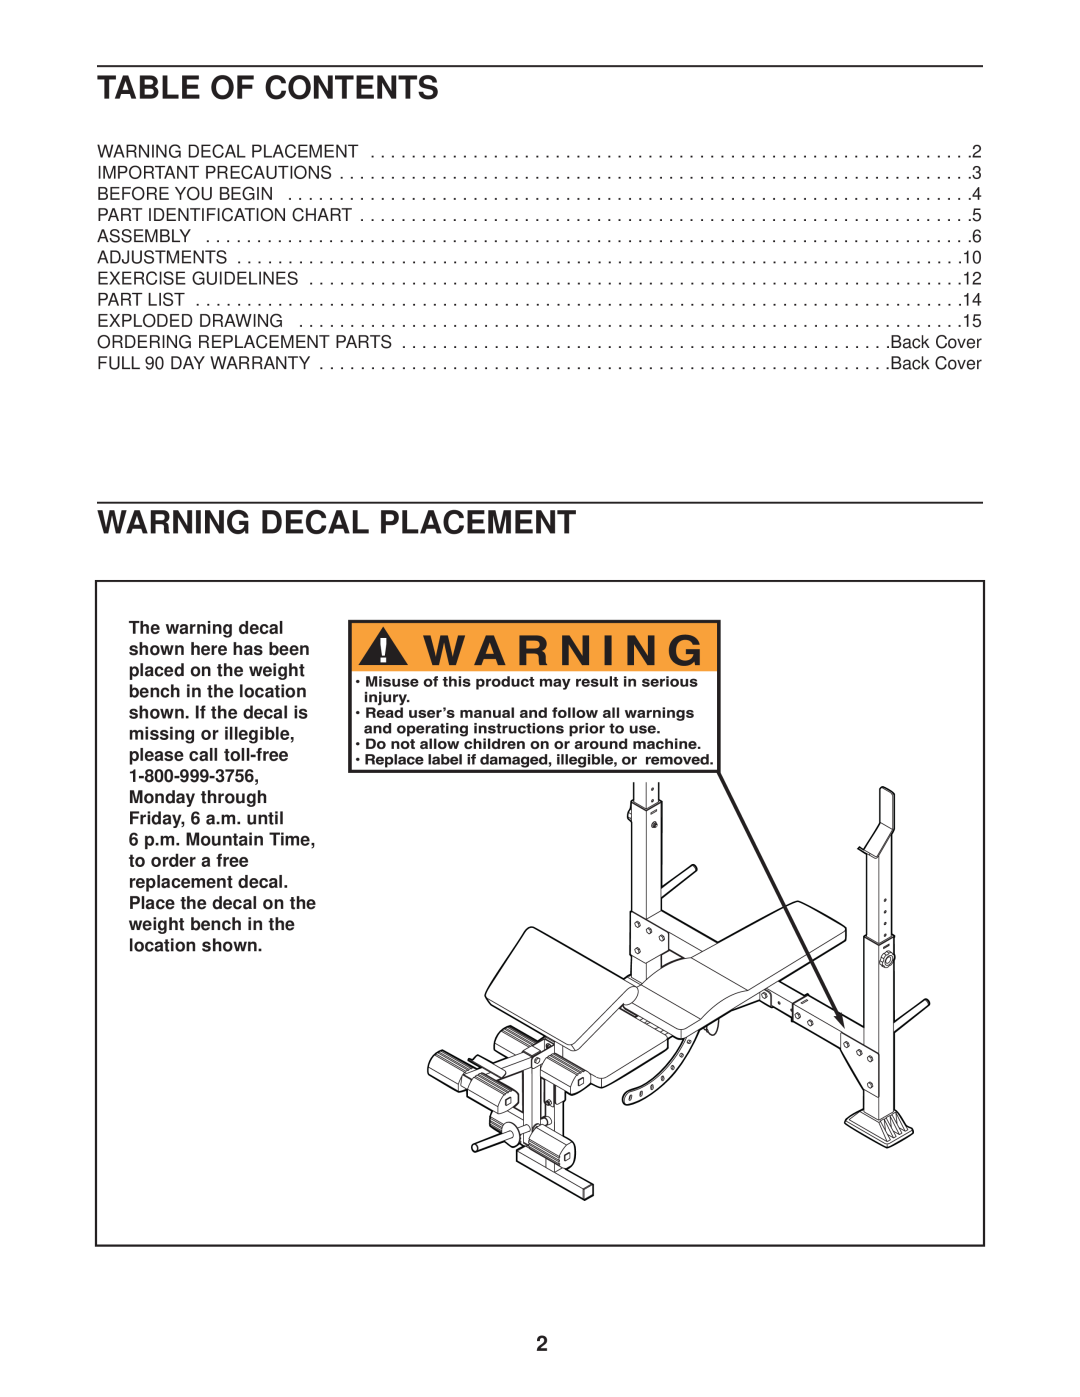 Weider 831.150310 user manual Table Of Contents, Warning Decal Placement 